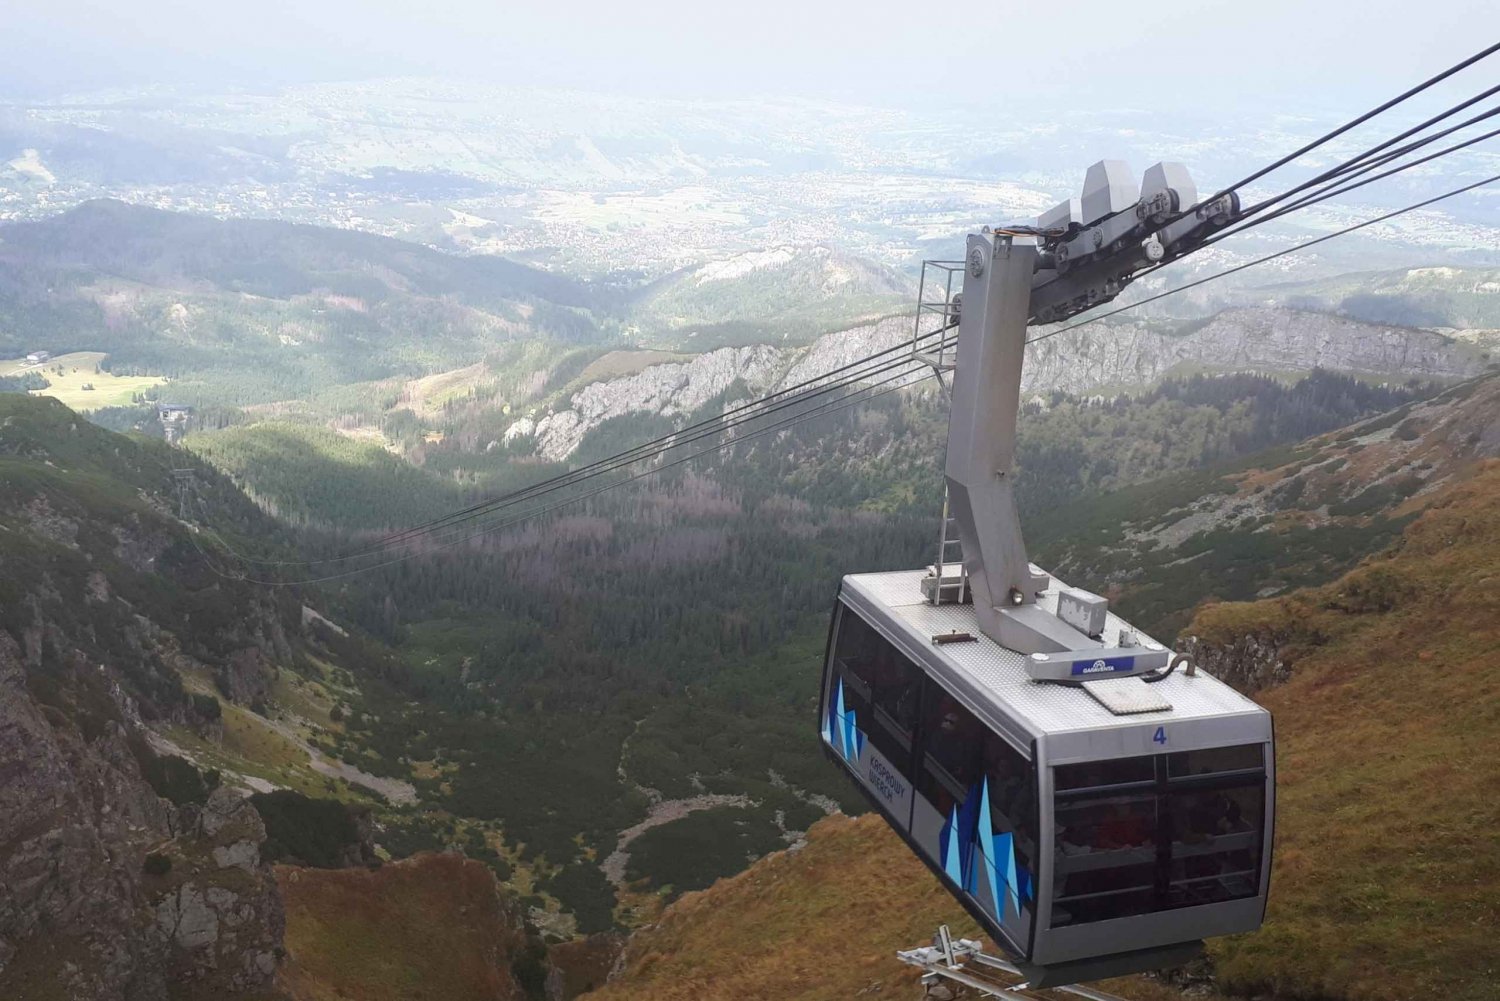 Zakopane Full-Day Trip from Krakow with Cable Car Ride